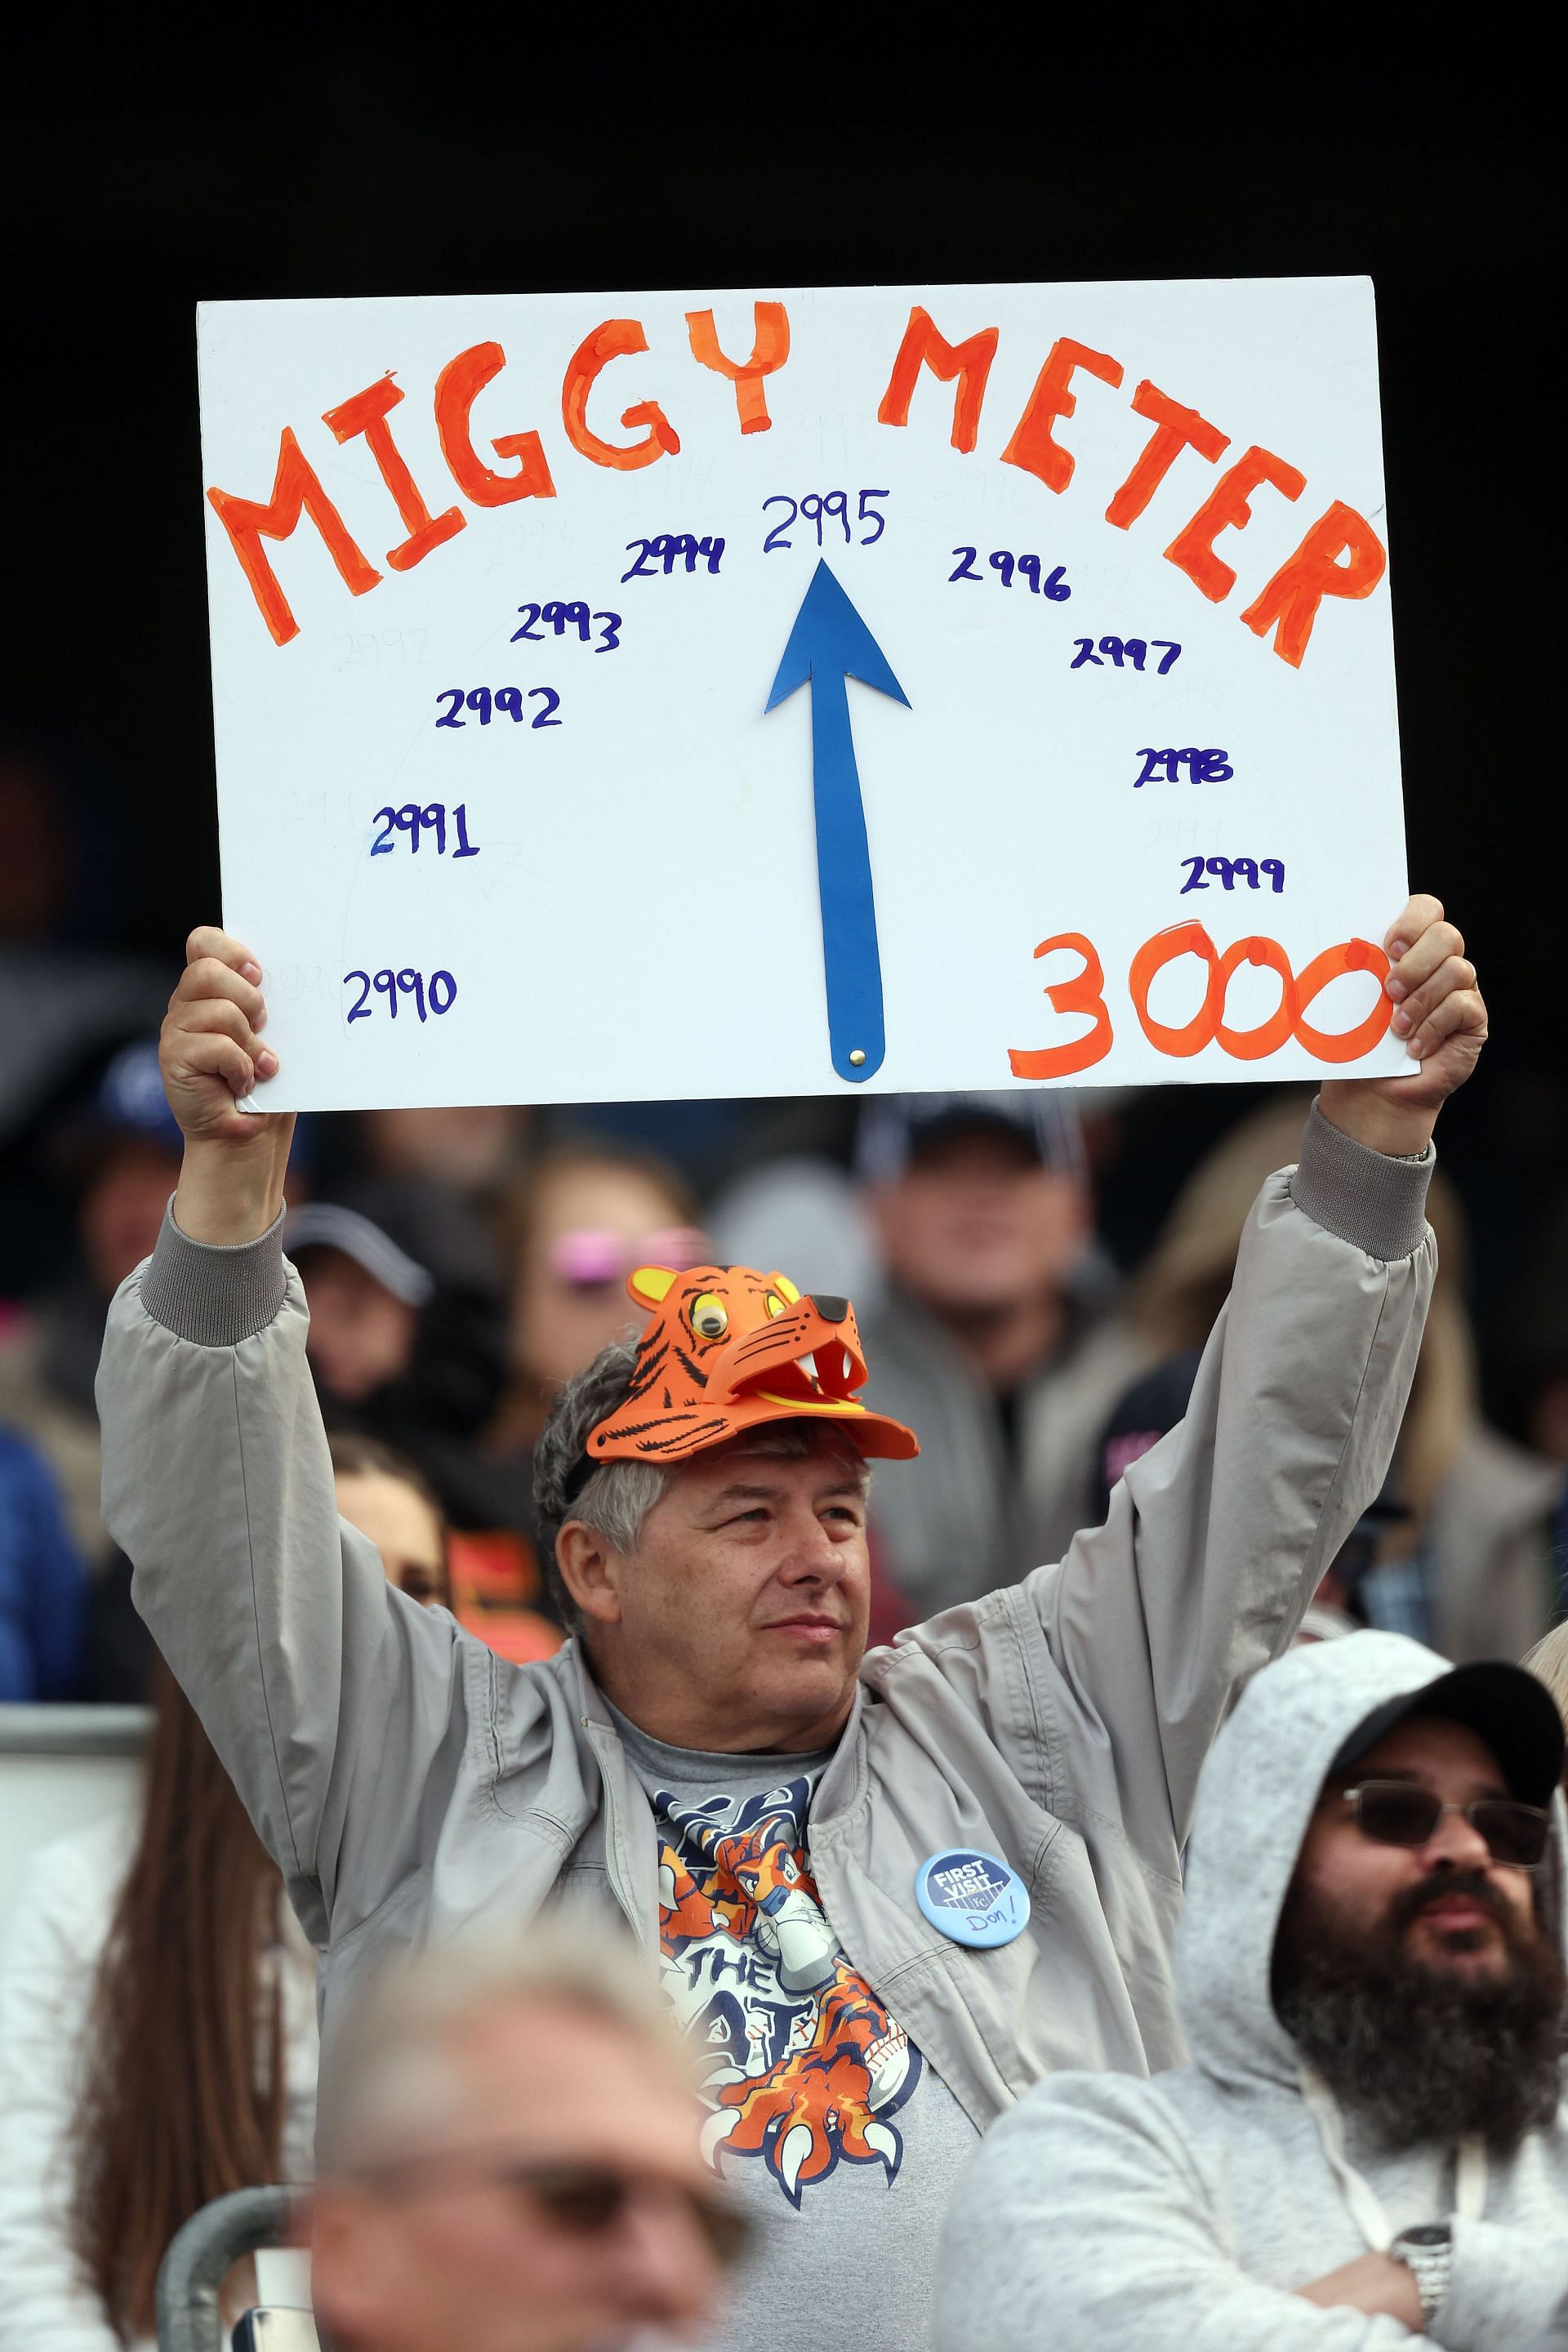 Tigers fans are some of the most passionate in sports.